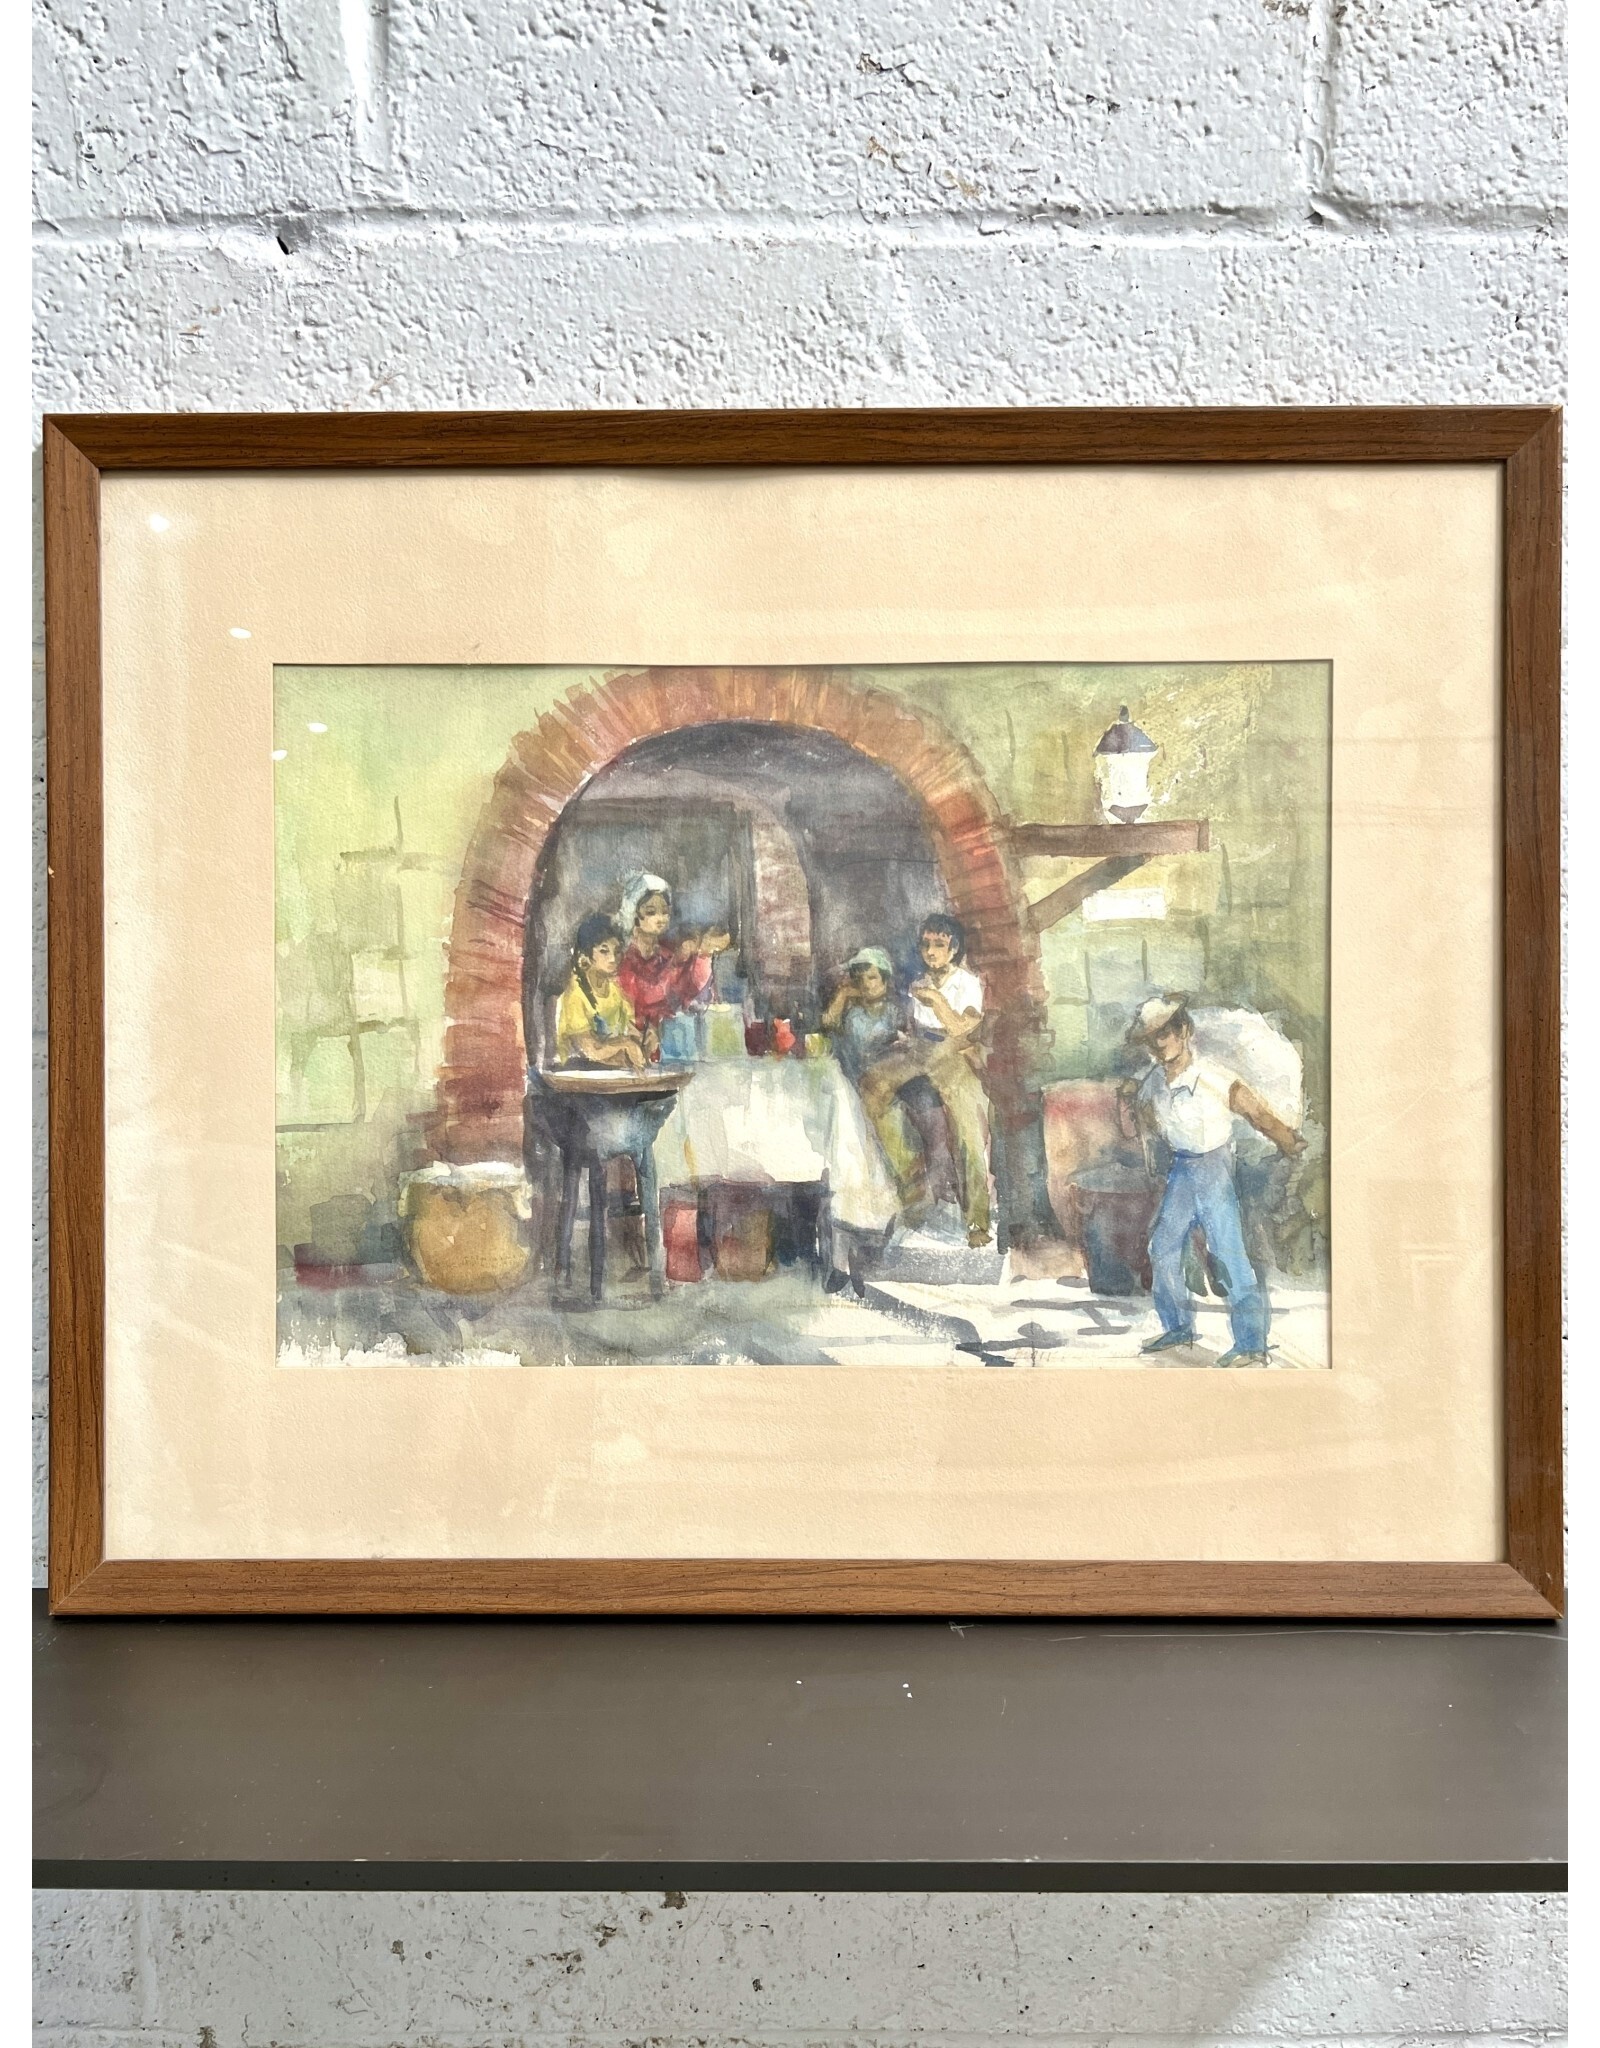 Old Aqueduct-Oaxaca Mexico, framed watercolor